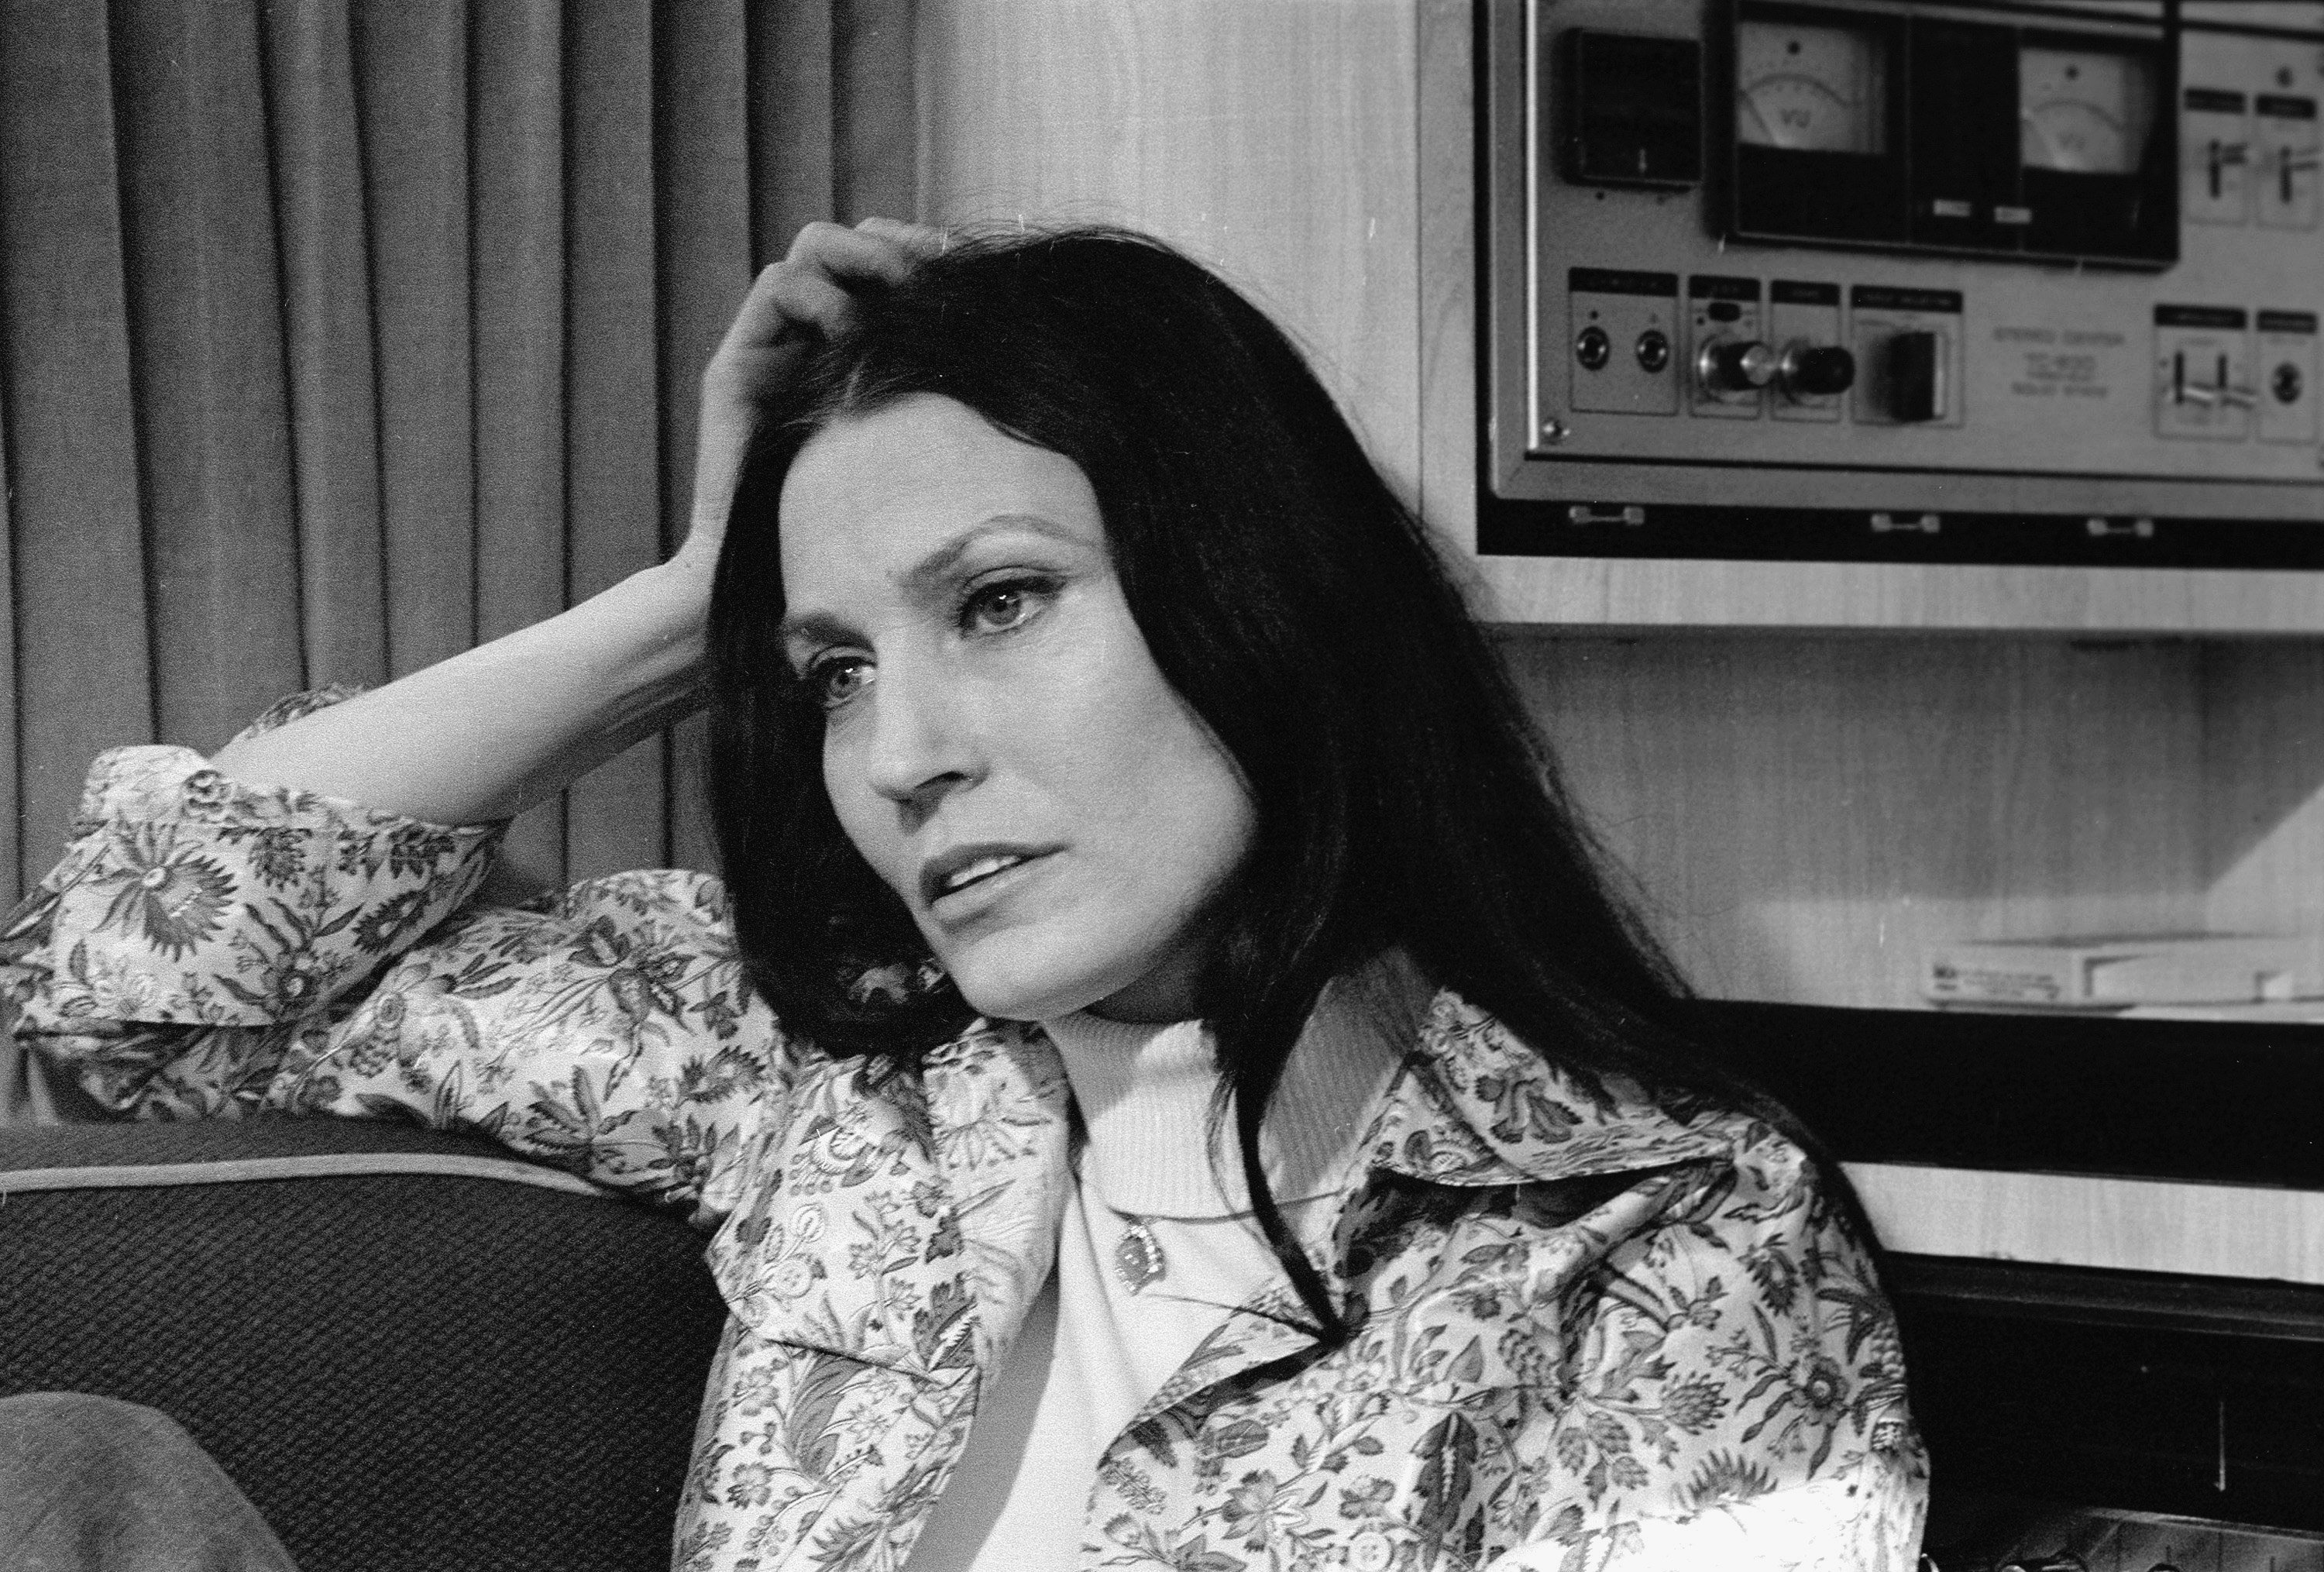 Loretta Lynn rests her head on her hand and reclines on a couch on February 24, 1975. | Source: Getty Images